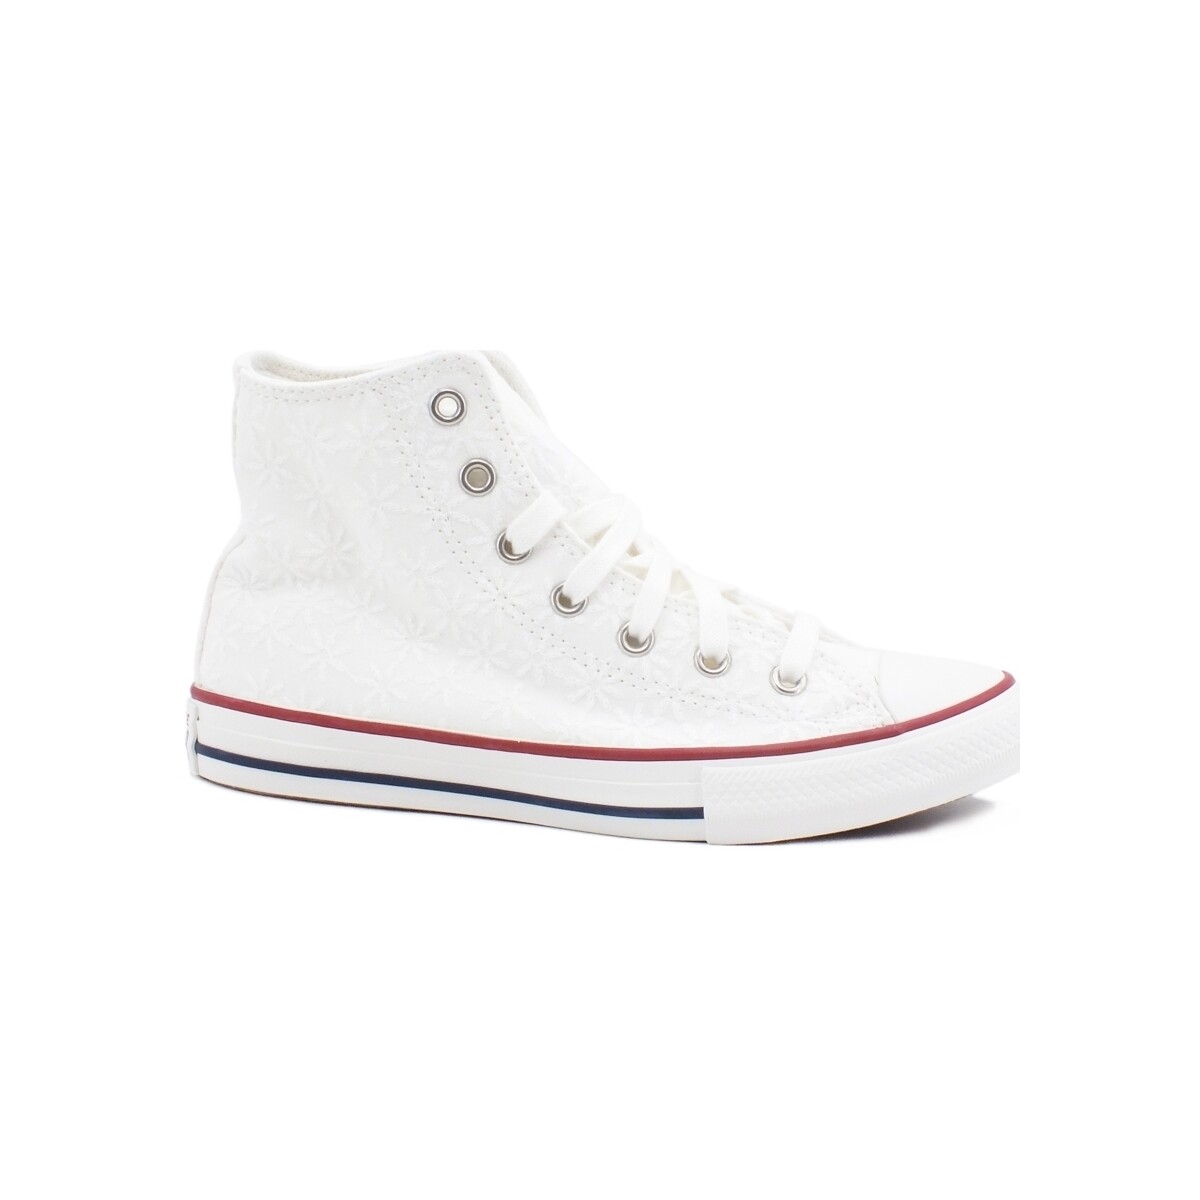 Chaussures Multisport Converse CT All Star Hi Sneakers Bambina White 668030C Blanc